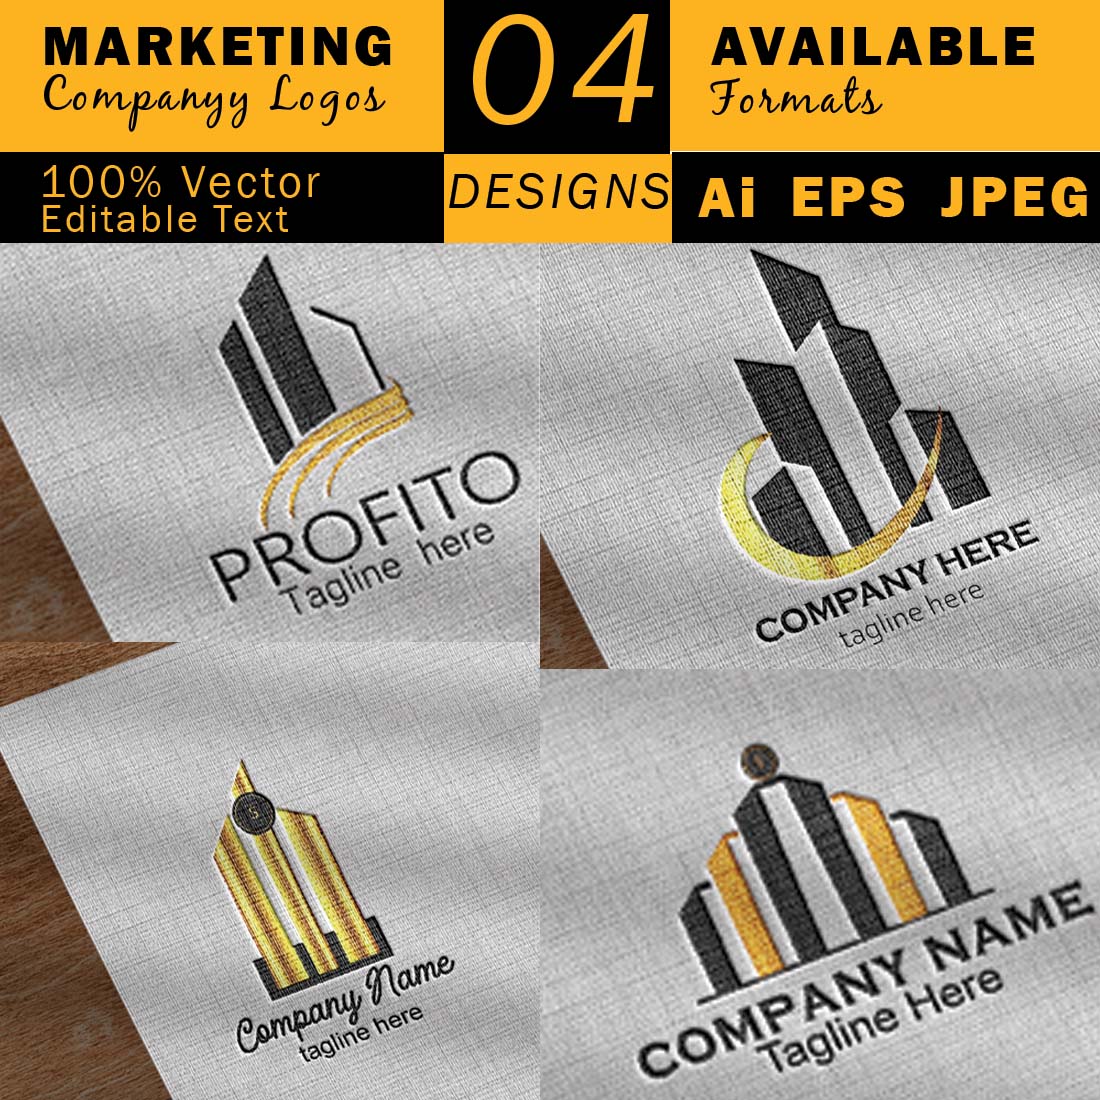 Marketing Company Logos for your Business or Brand preview image.